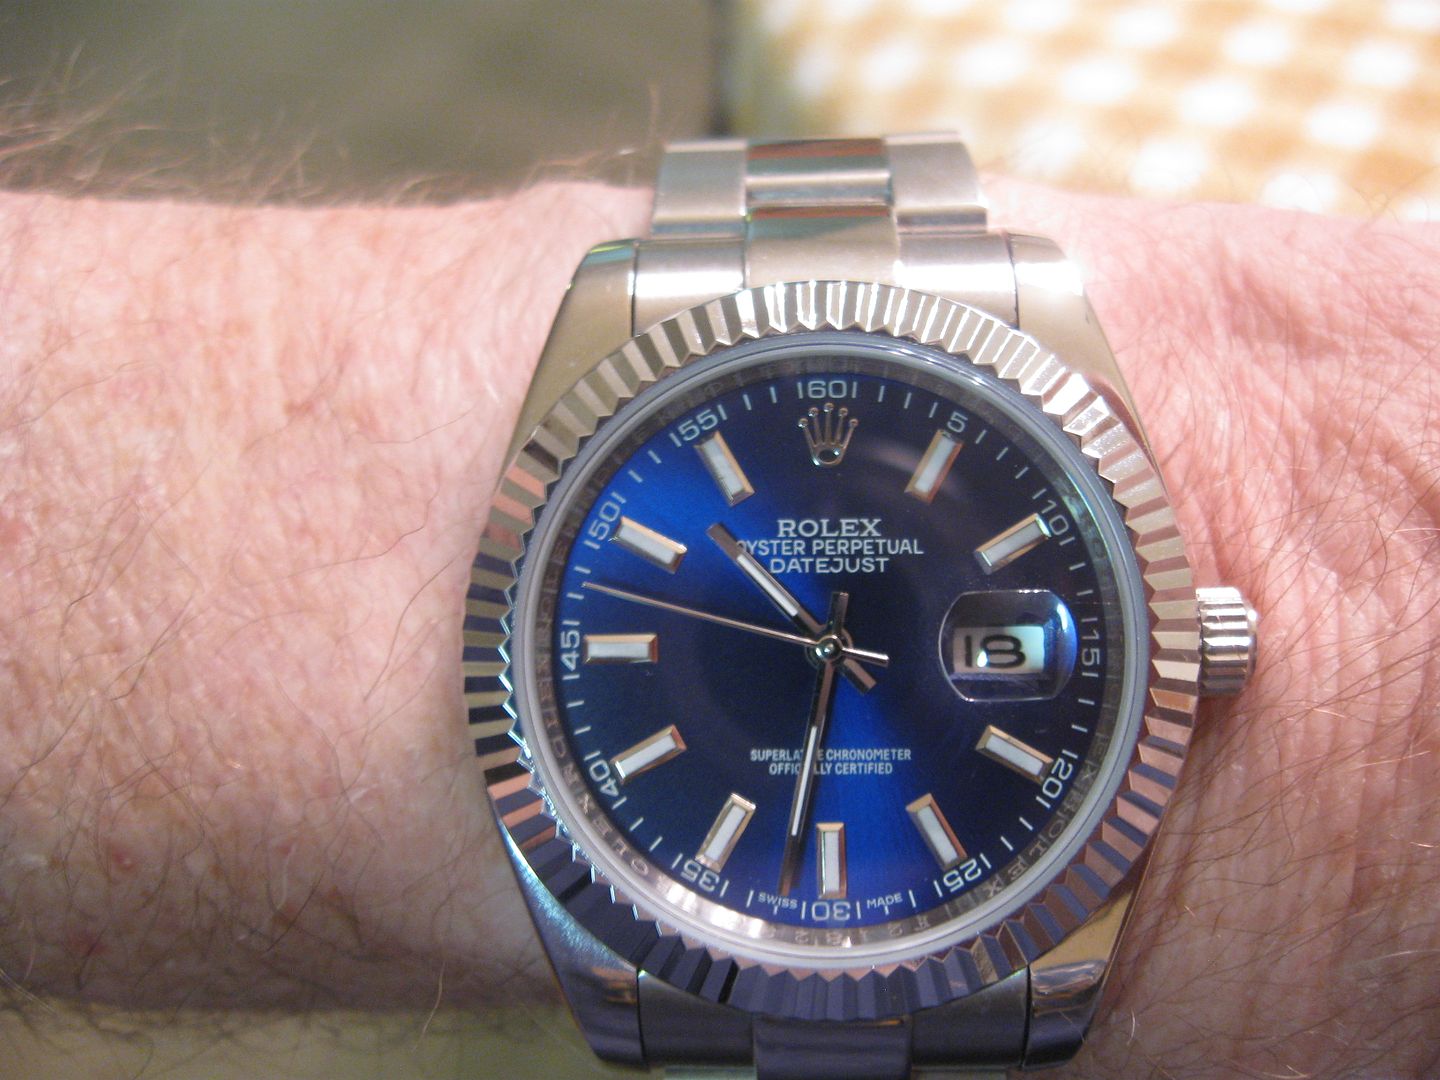 ROLEXDJ11.Blue.Dial%20on%20SS%20Oyster%2